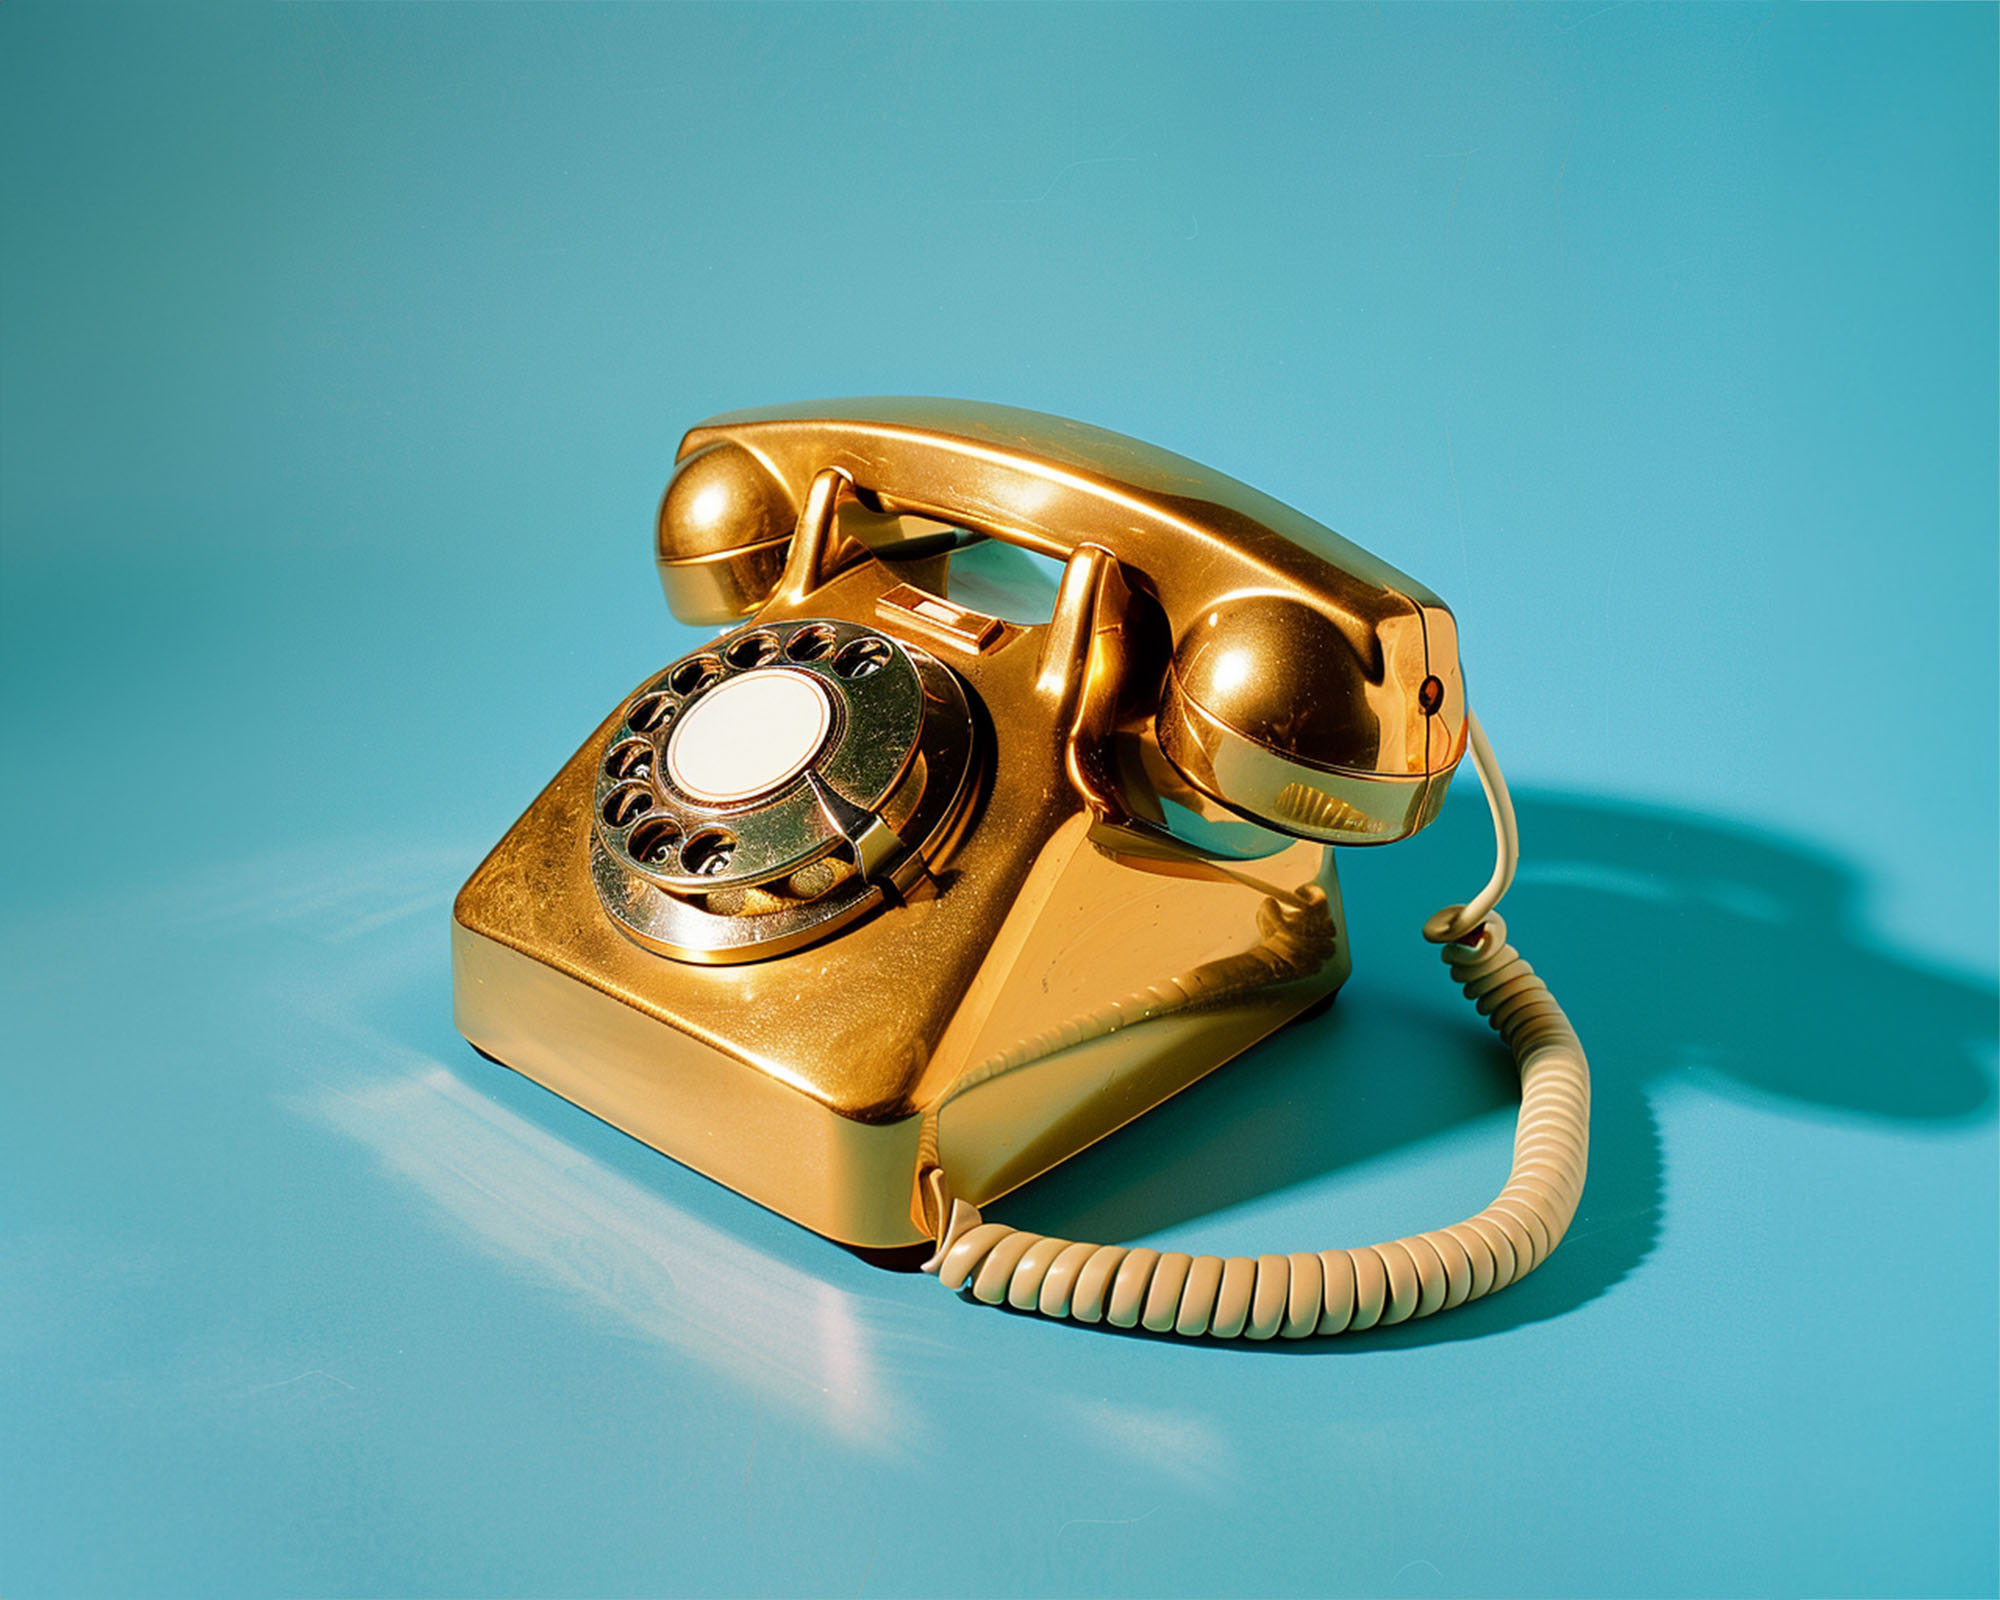 Study proves: Telephone surveys are the »Gold Standard of Public Opinion Polls«